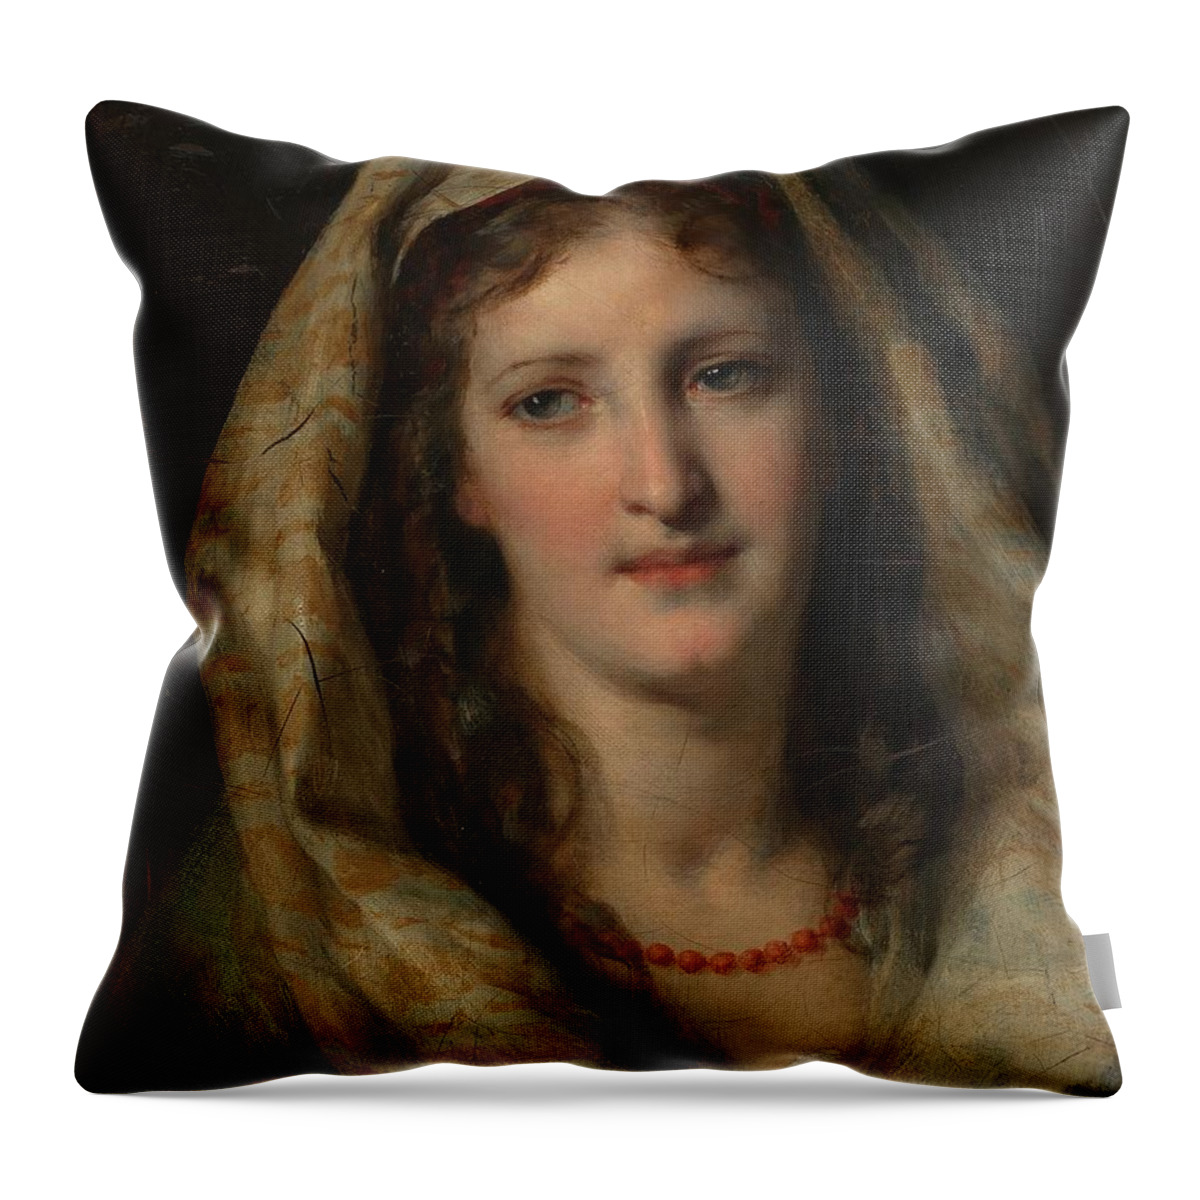 Belgian Throw Pillow featuring the painting Friedrich von Amerling Vienna by MotionAge Designs